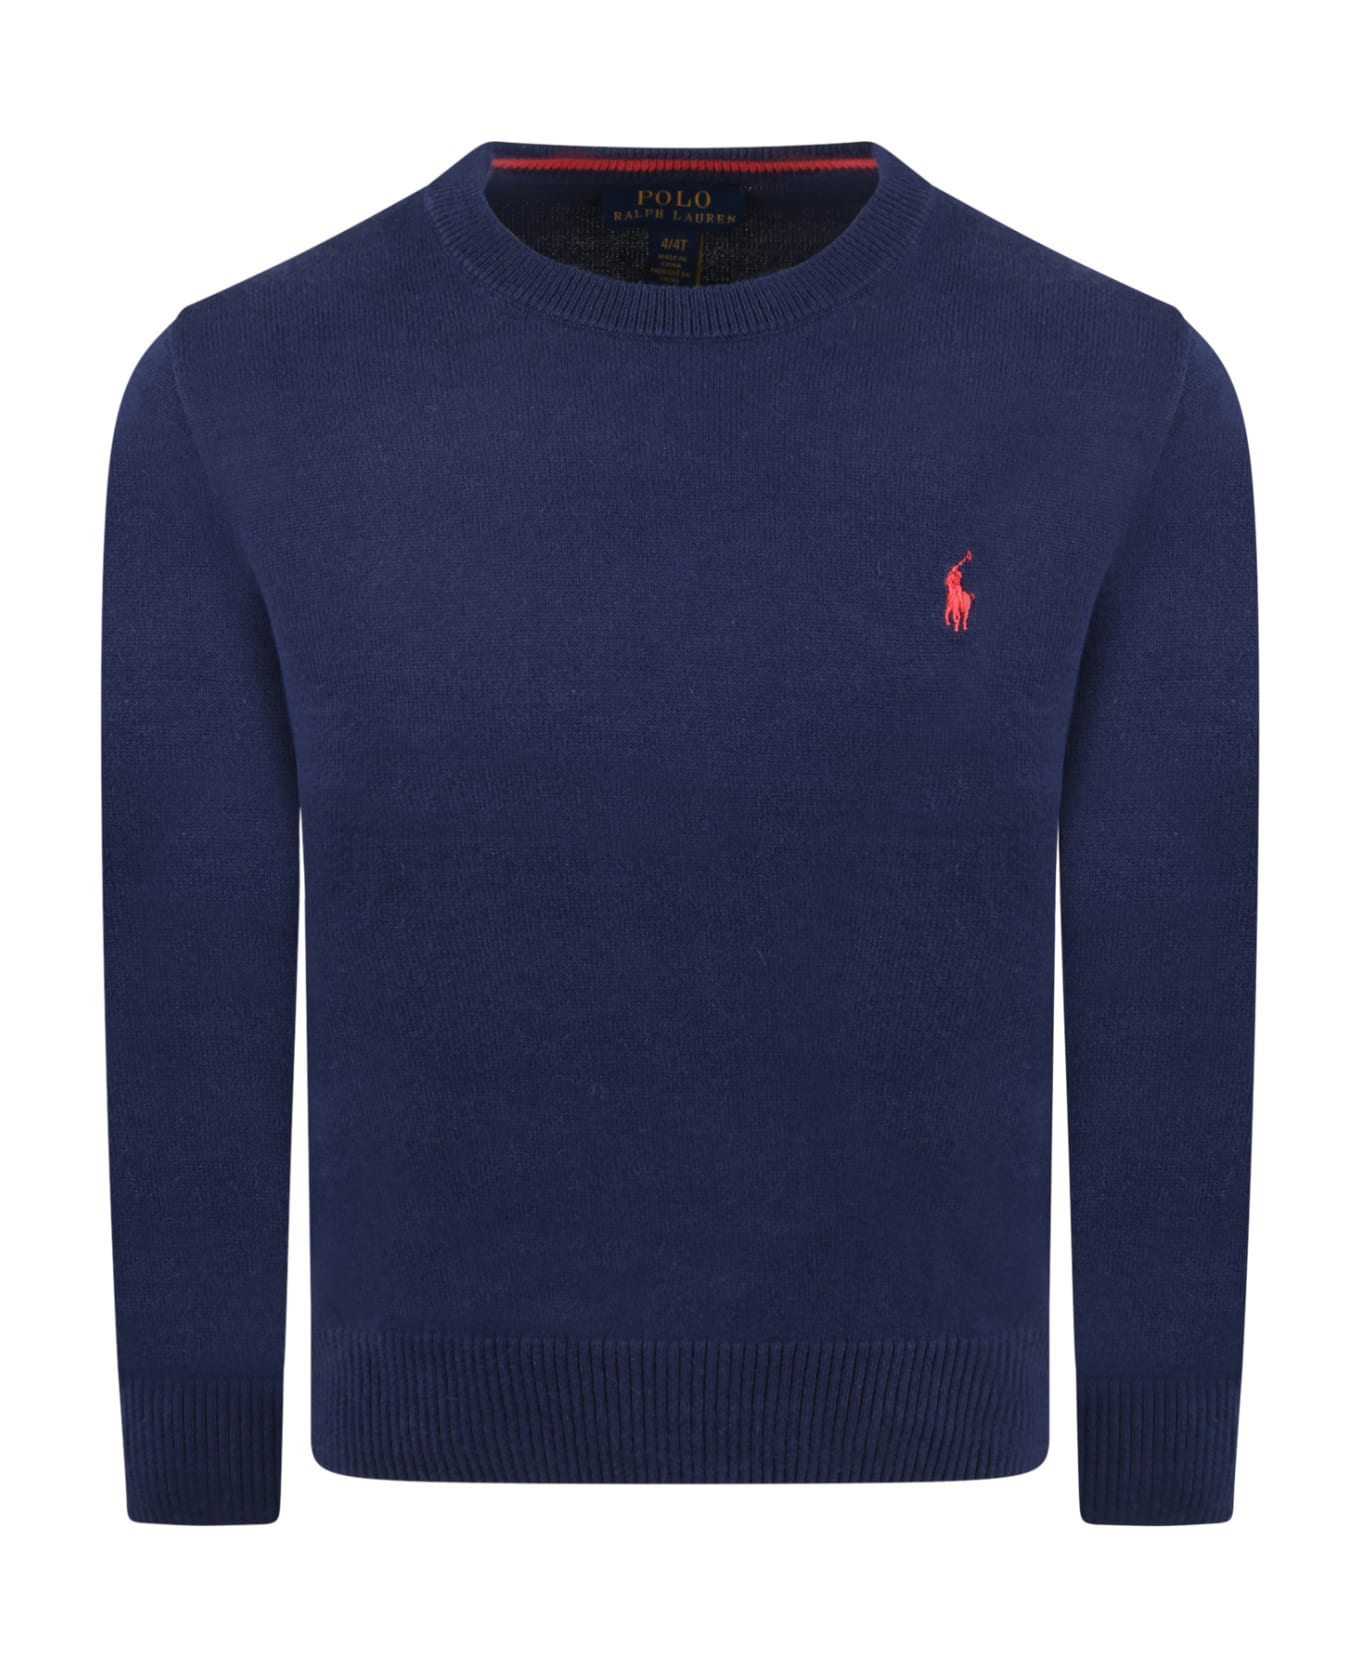 Ralph Lauren Blue Sweater For Boy With Pony Logo - Blue